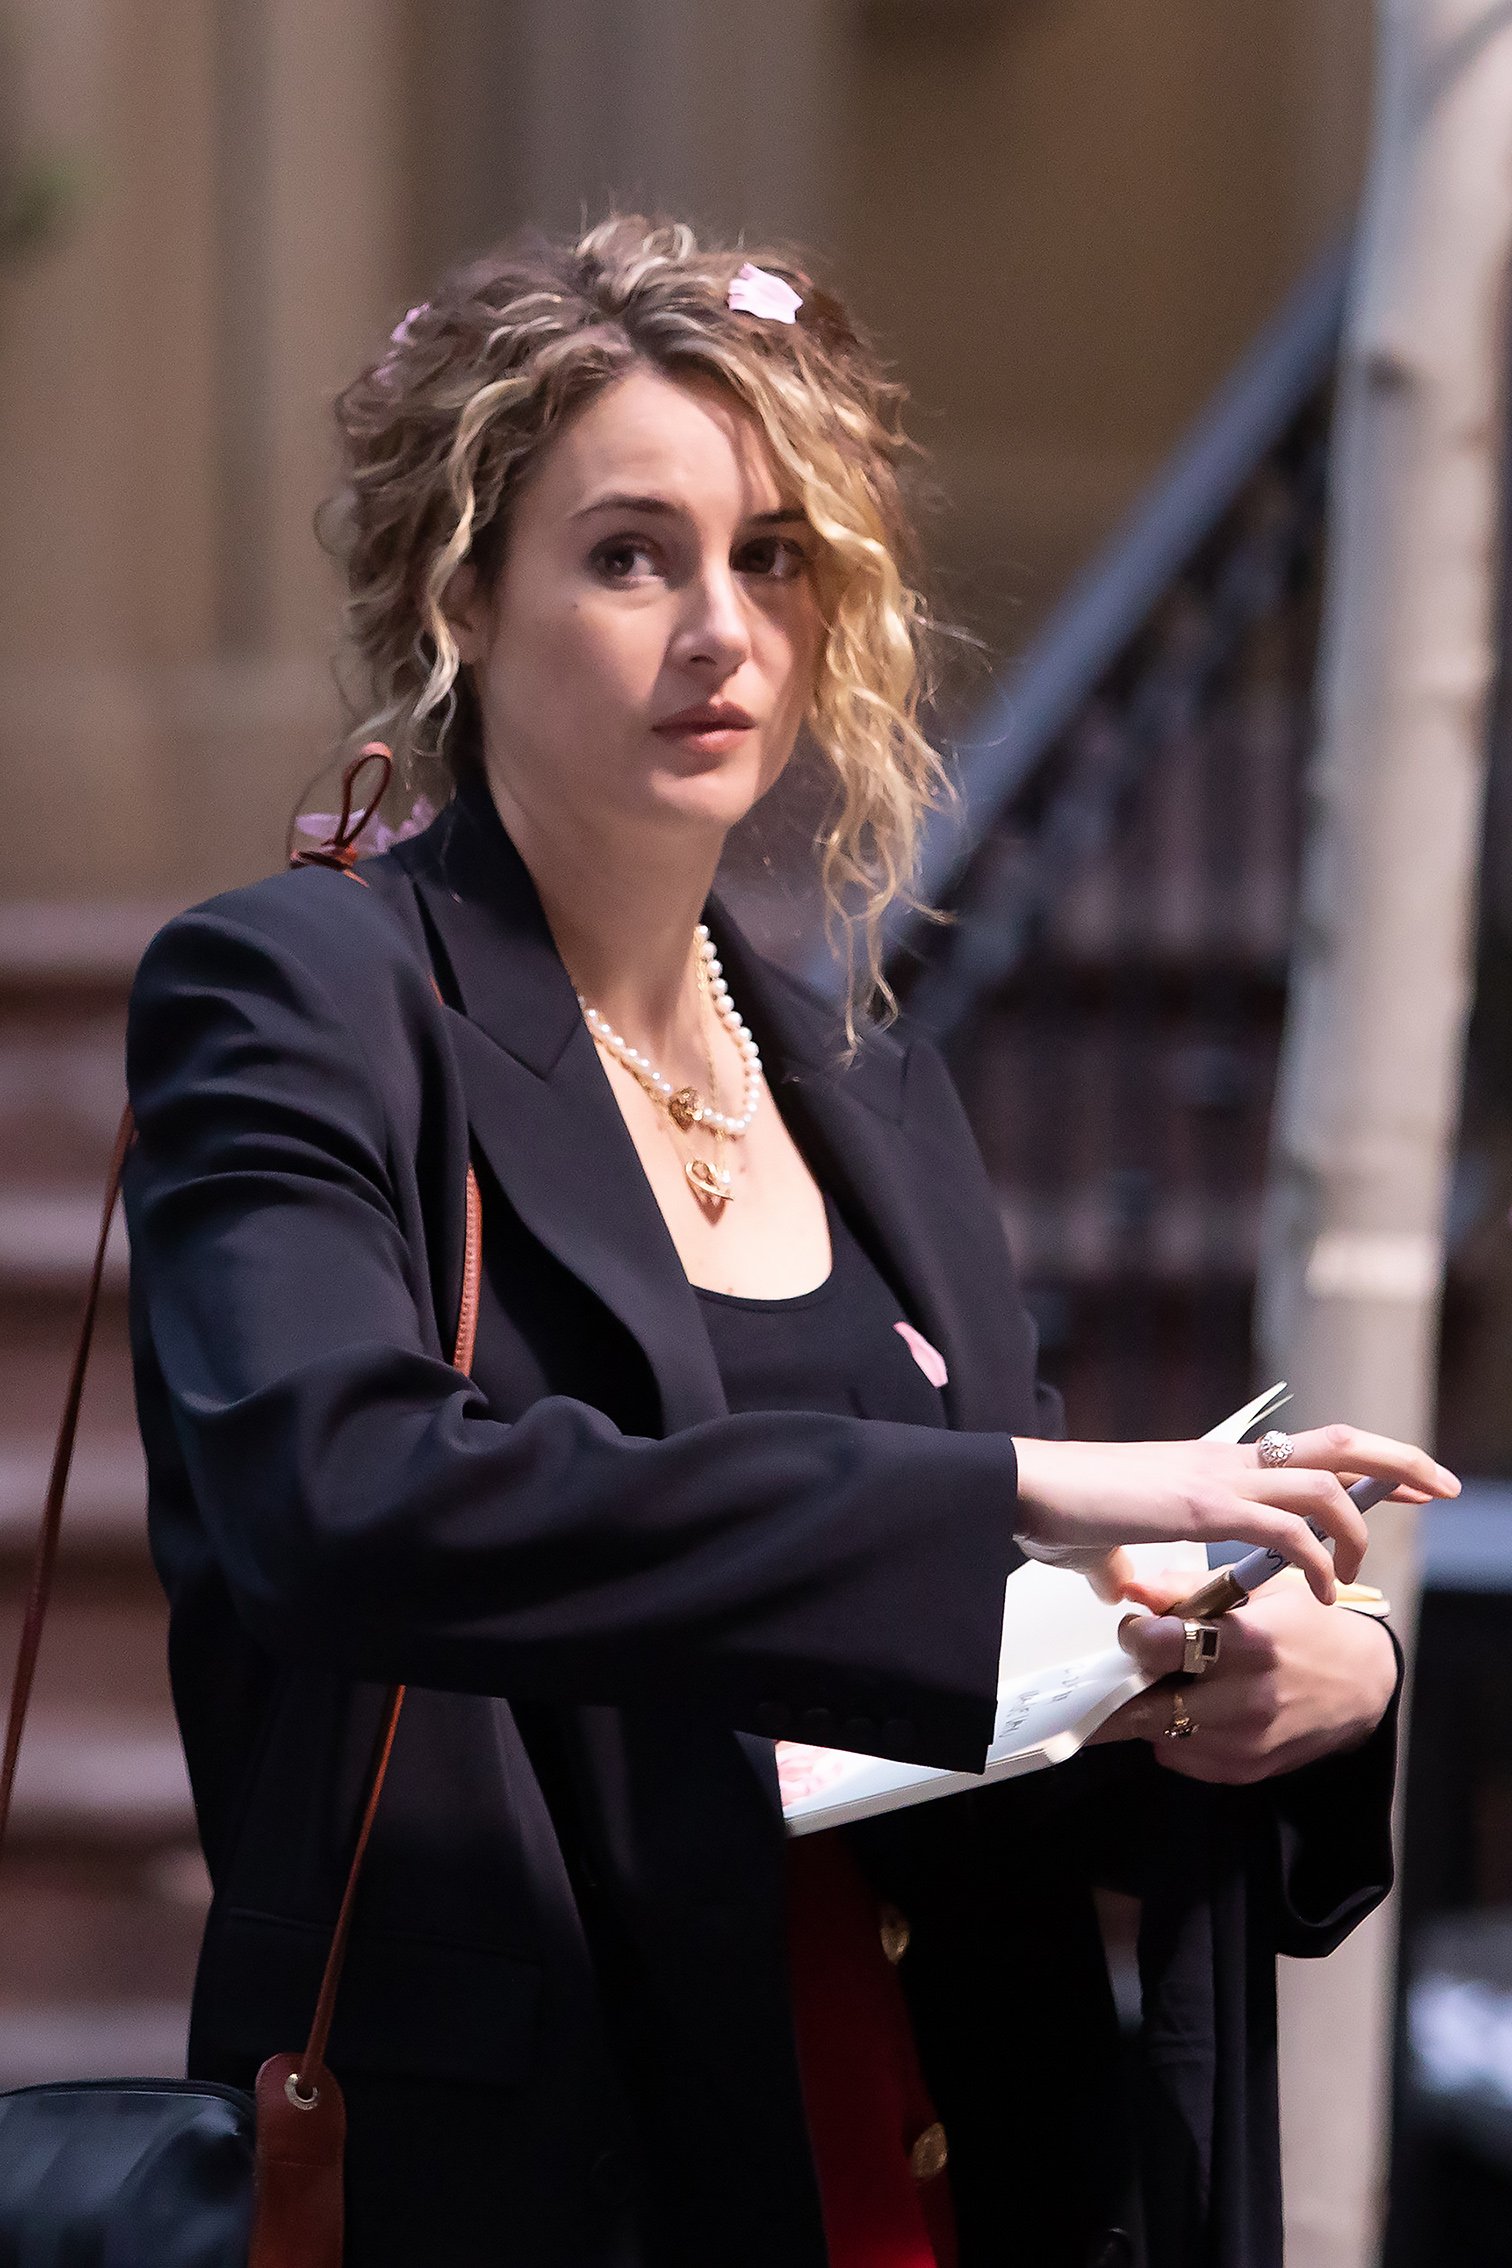 Shailene Woodley is seen on the set of "Three Women" on April 25, 2022 in New York City. | Source: Getty Images